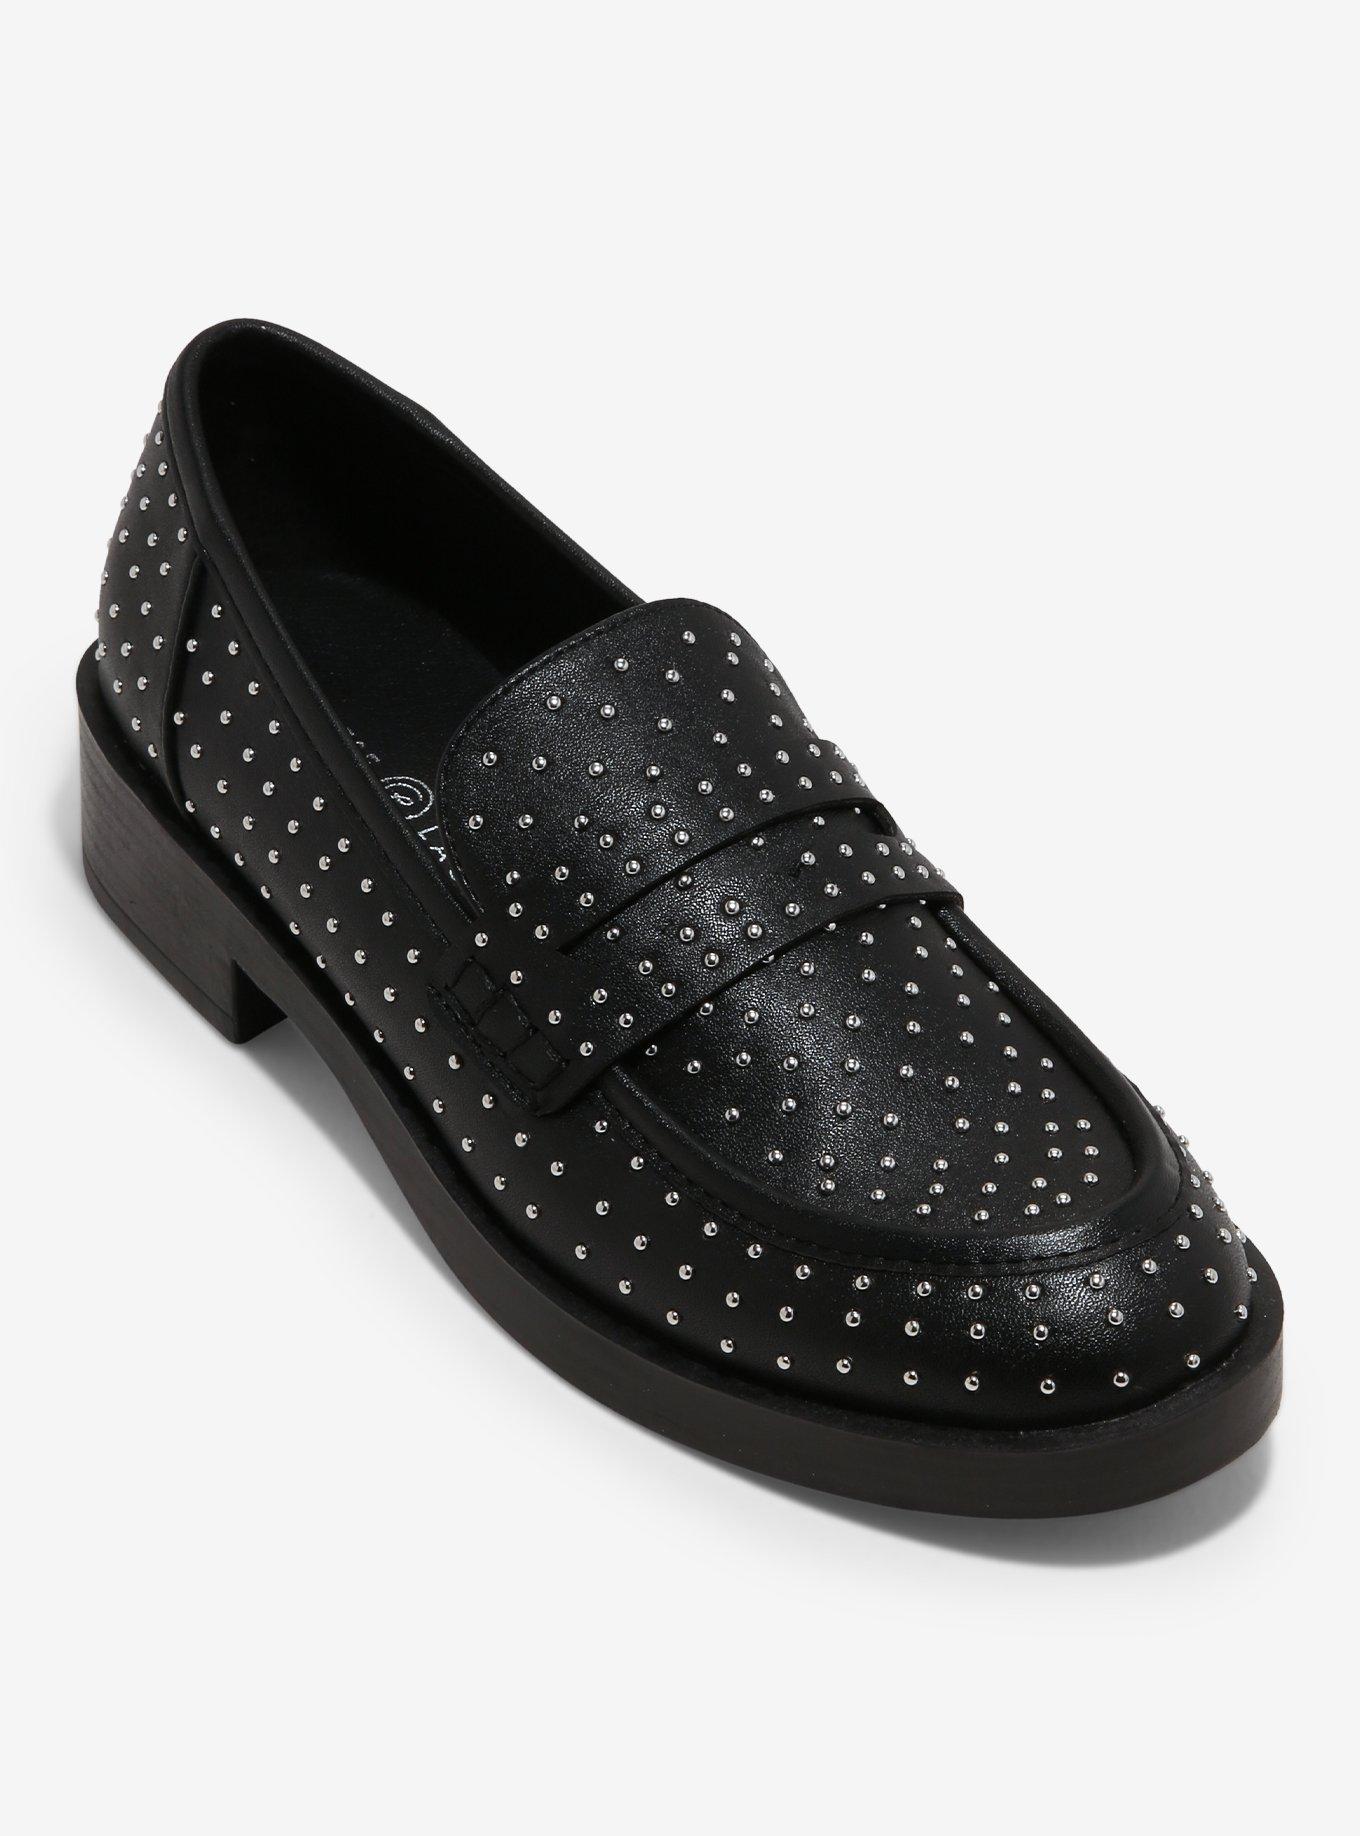 Chinese Laundry Black Studded Loafers, MULTI, hi-res